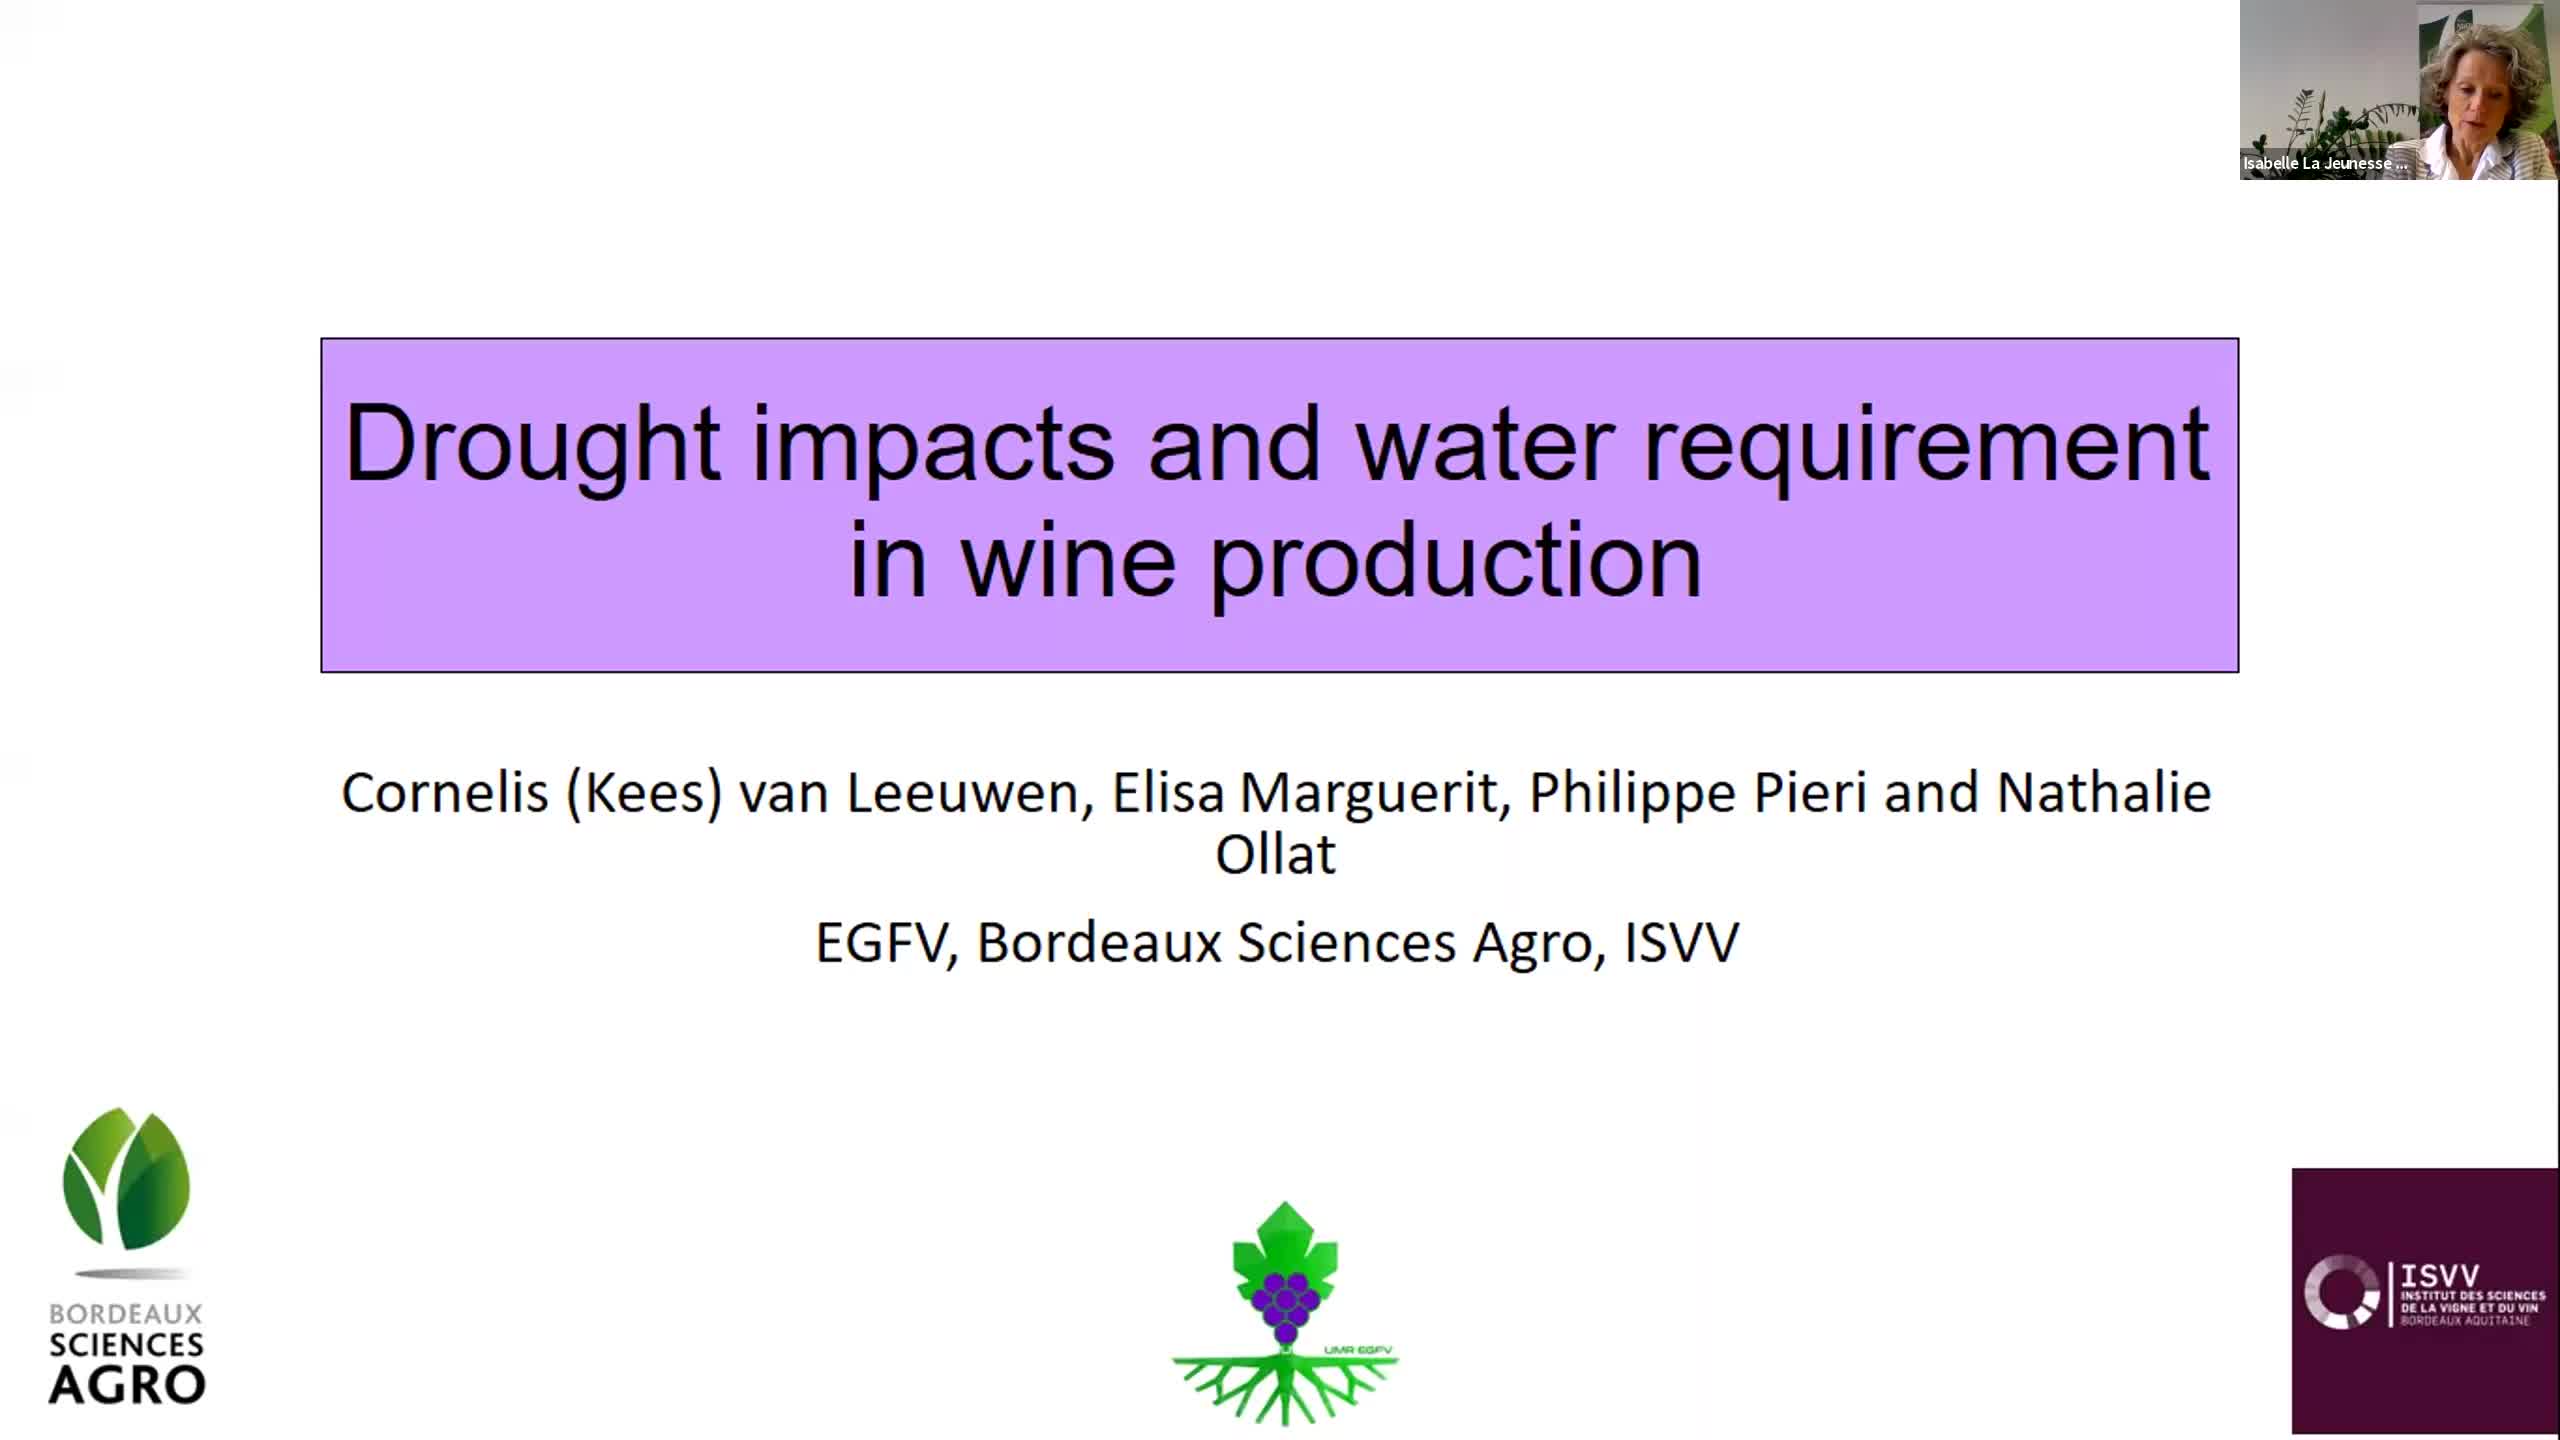 S3- Drought impacts and water requirement in wine production